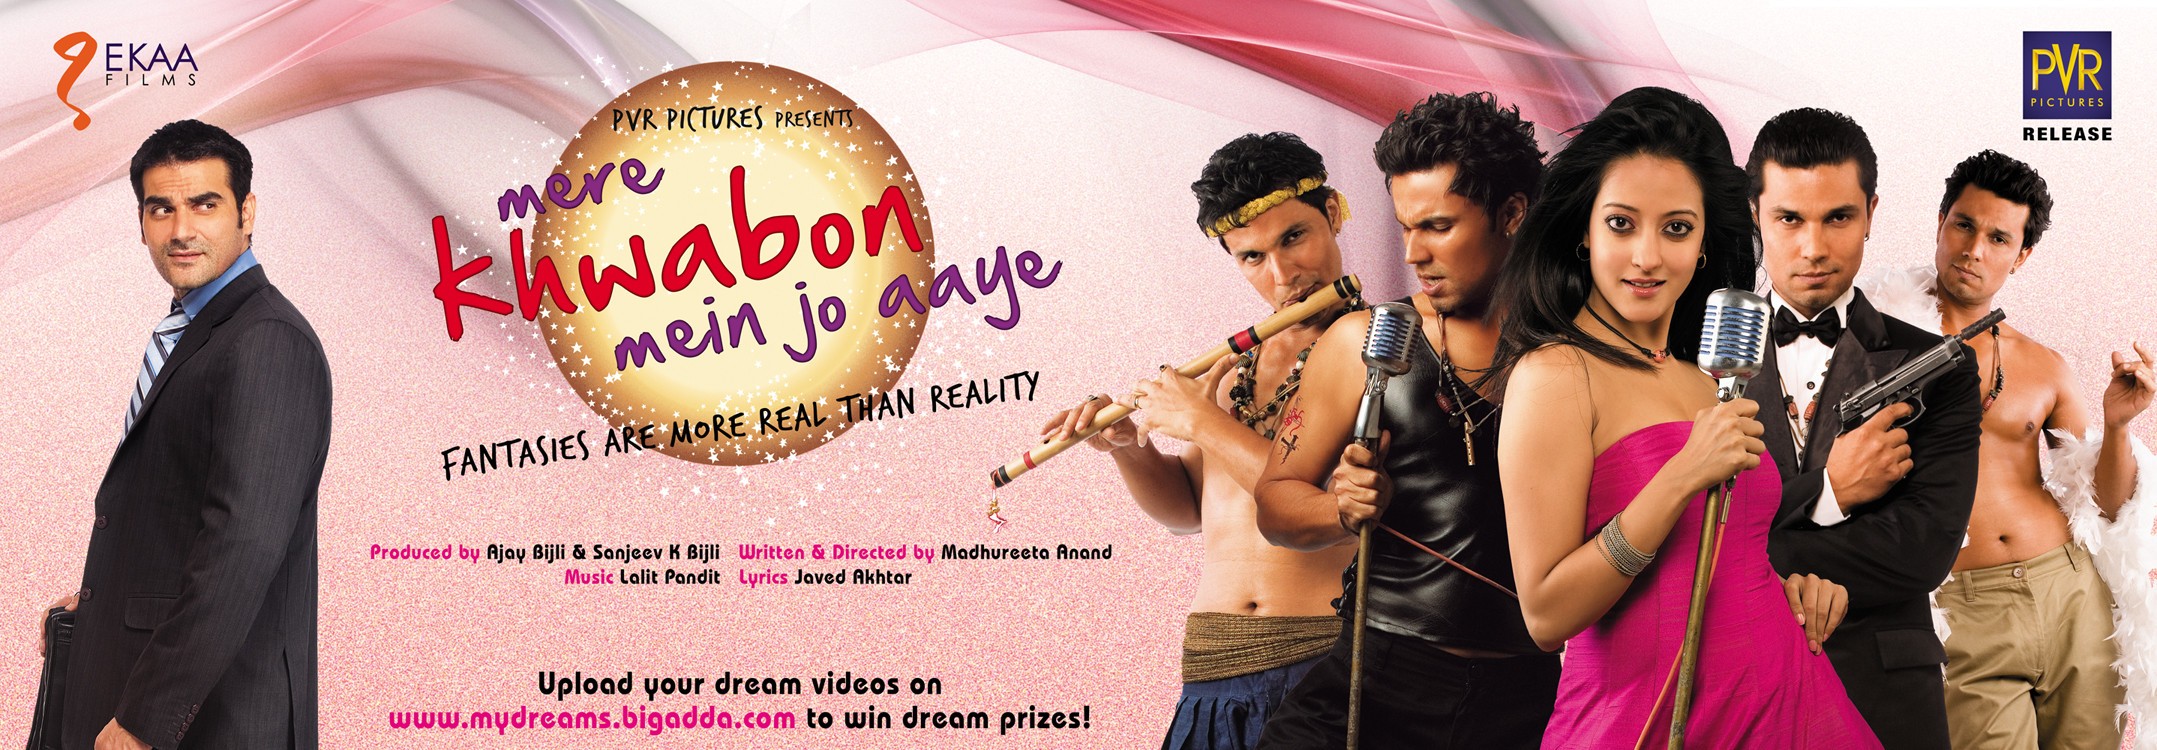 Mega Sized Movie Poster Image for Mere Khwabon Mein Jo Aaye (#3 of 3)